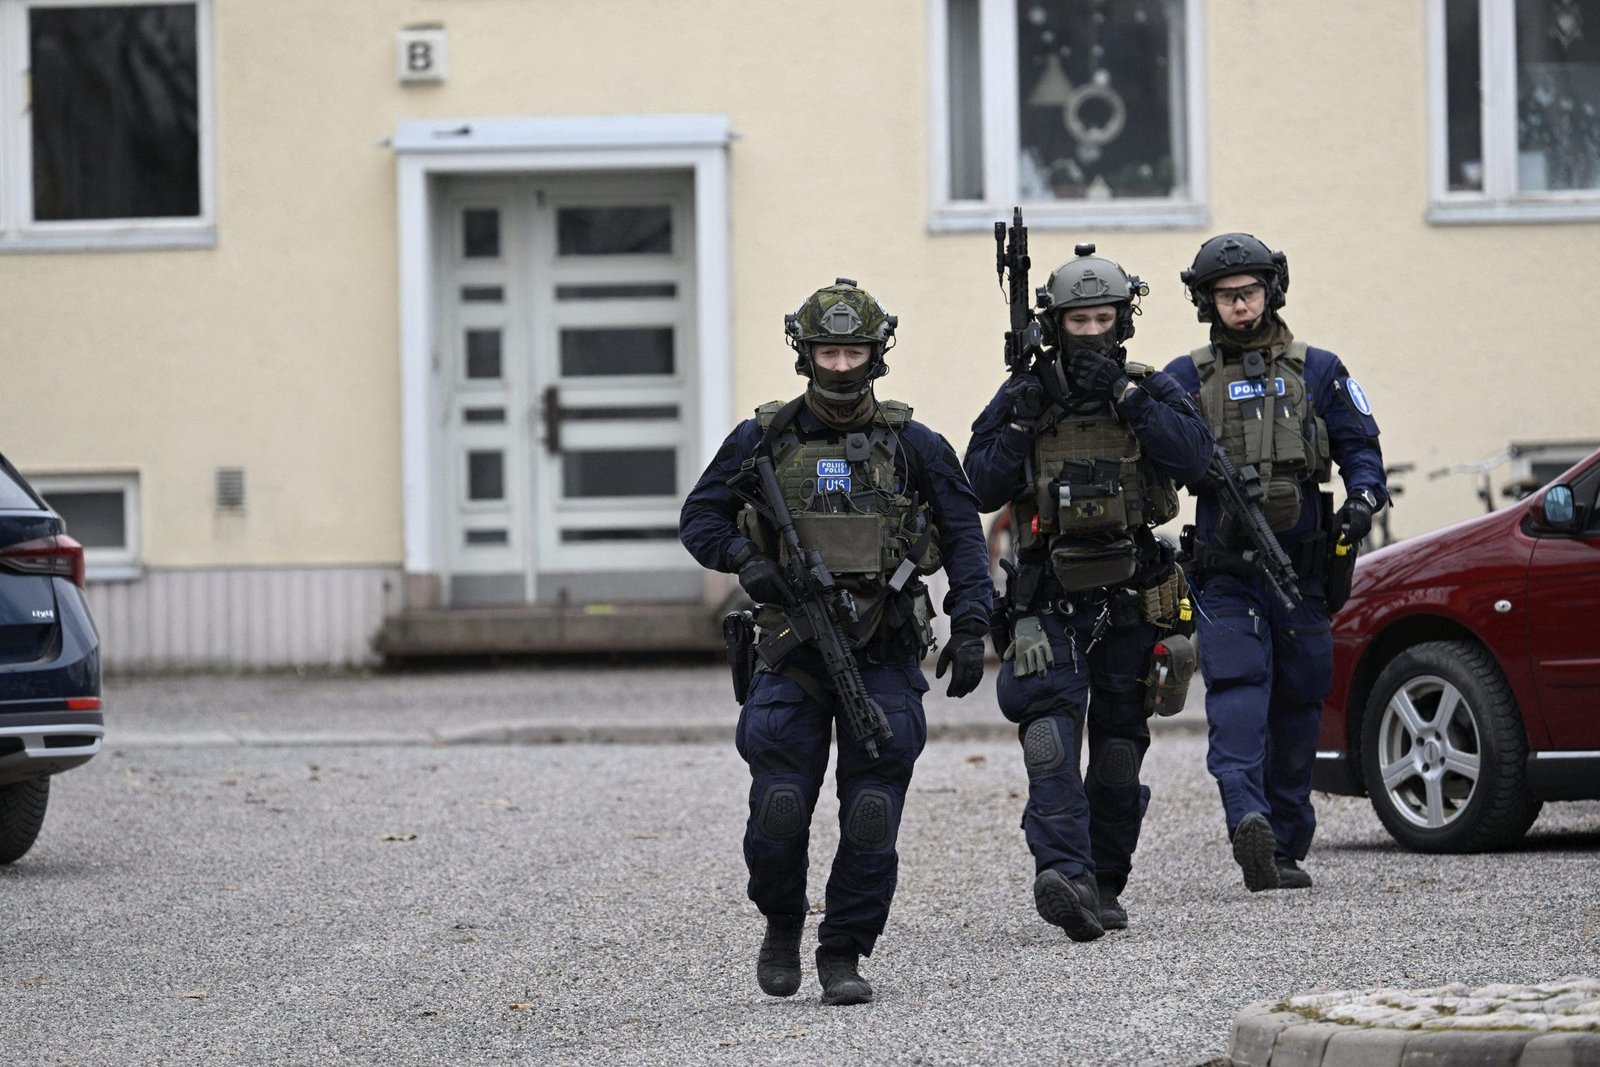 Suspect arrested after school shooting in Finland multiple wounded